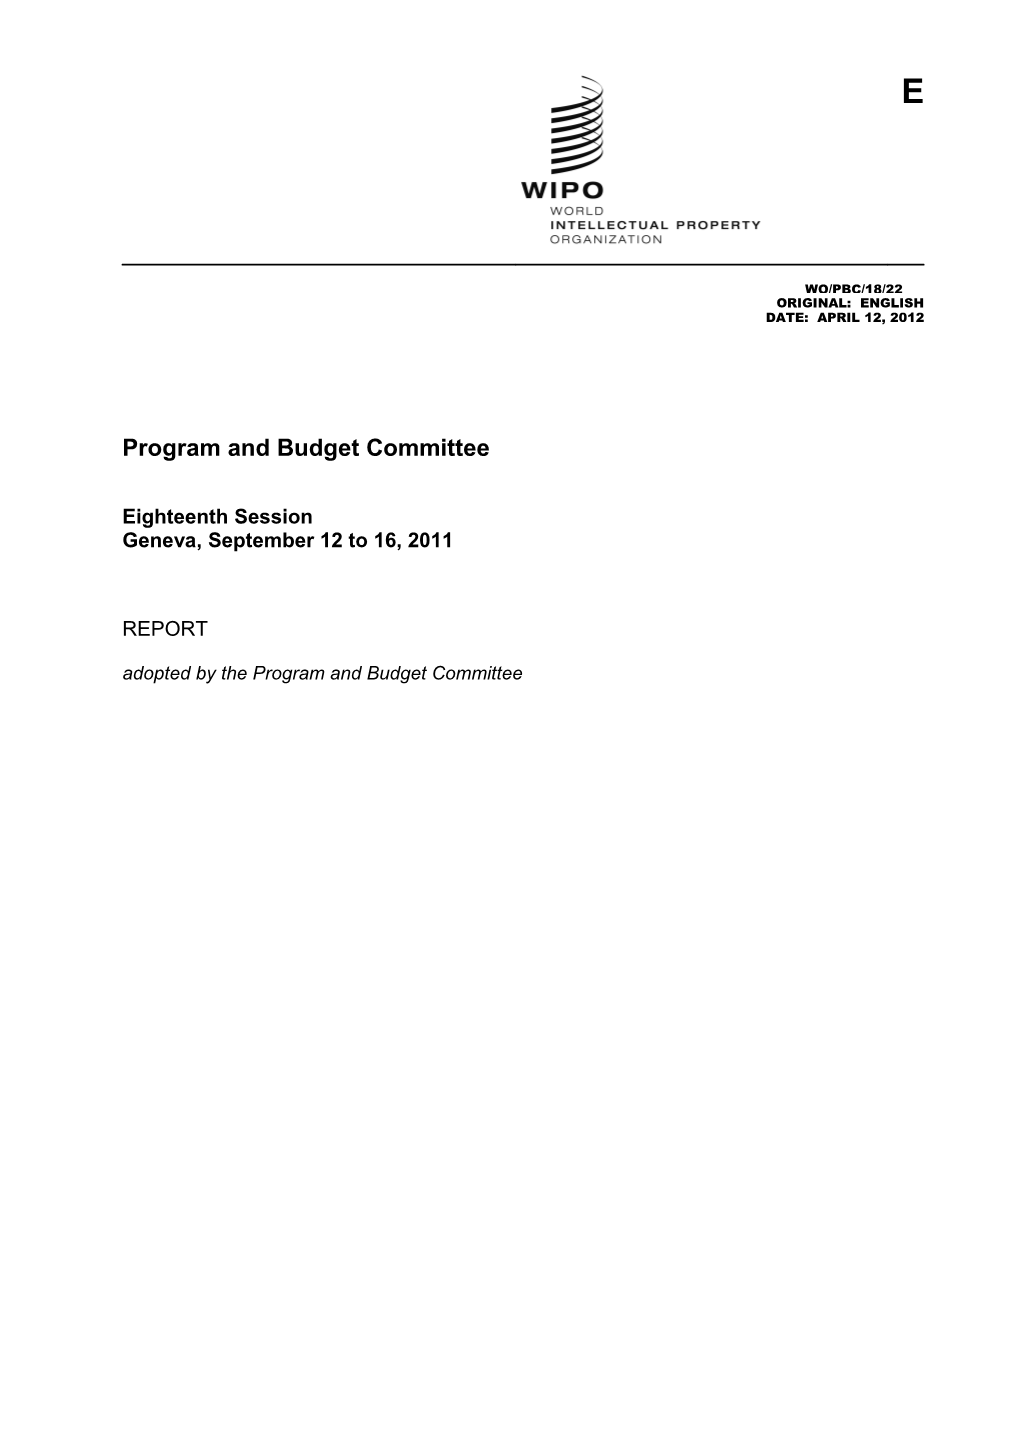 Program and Budget Committee s1